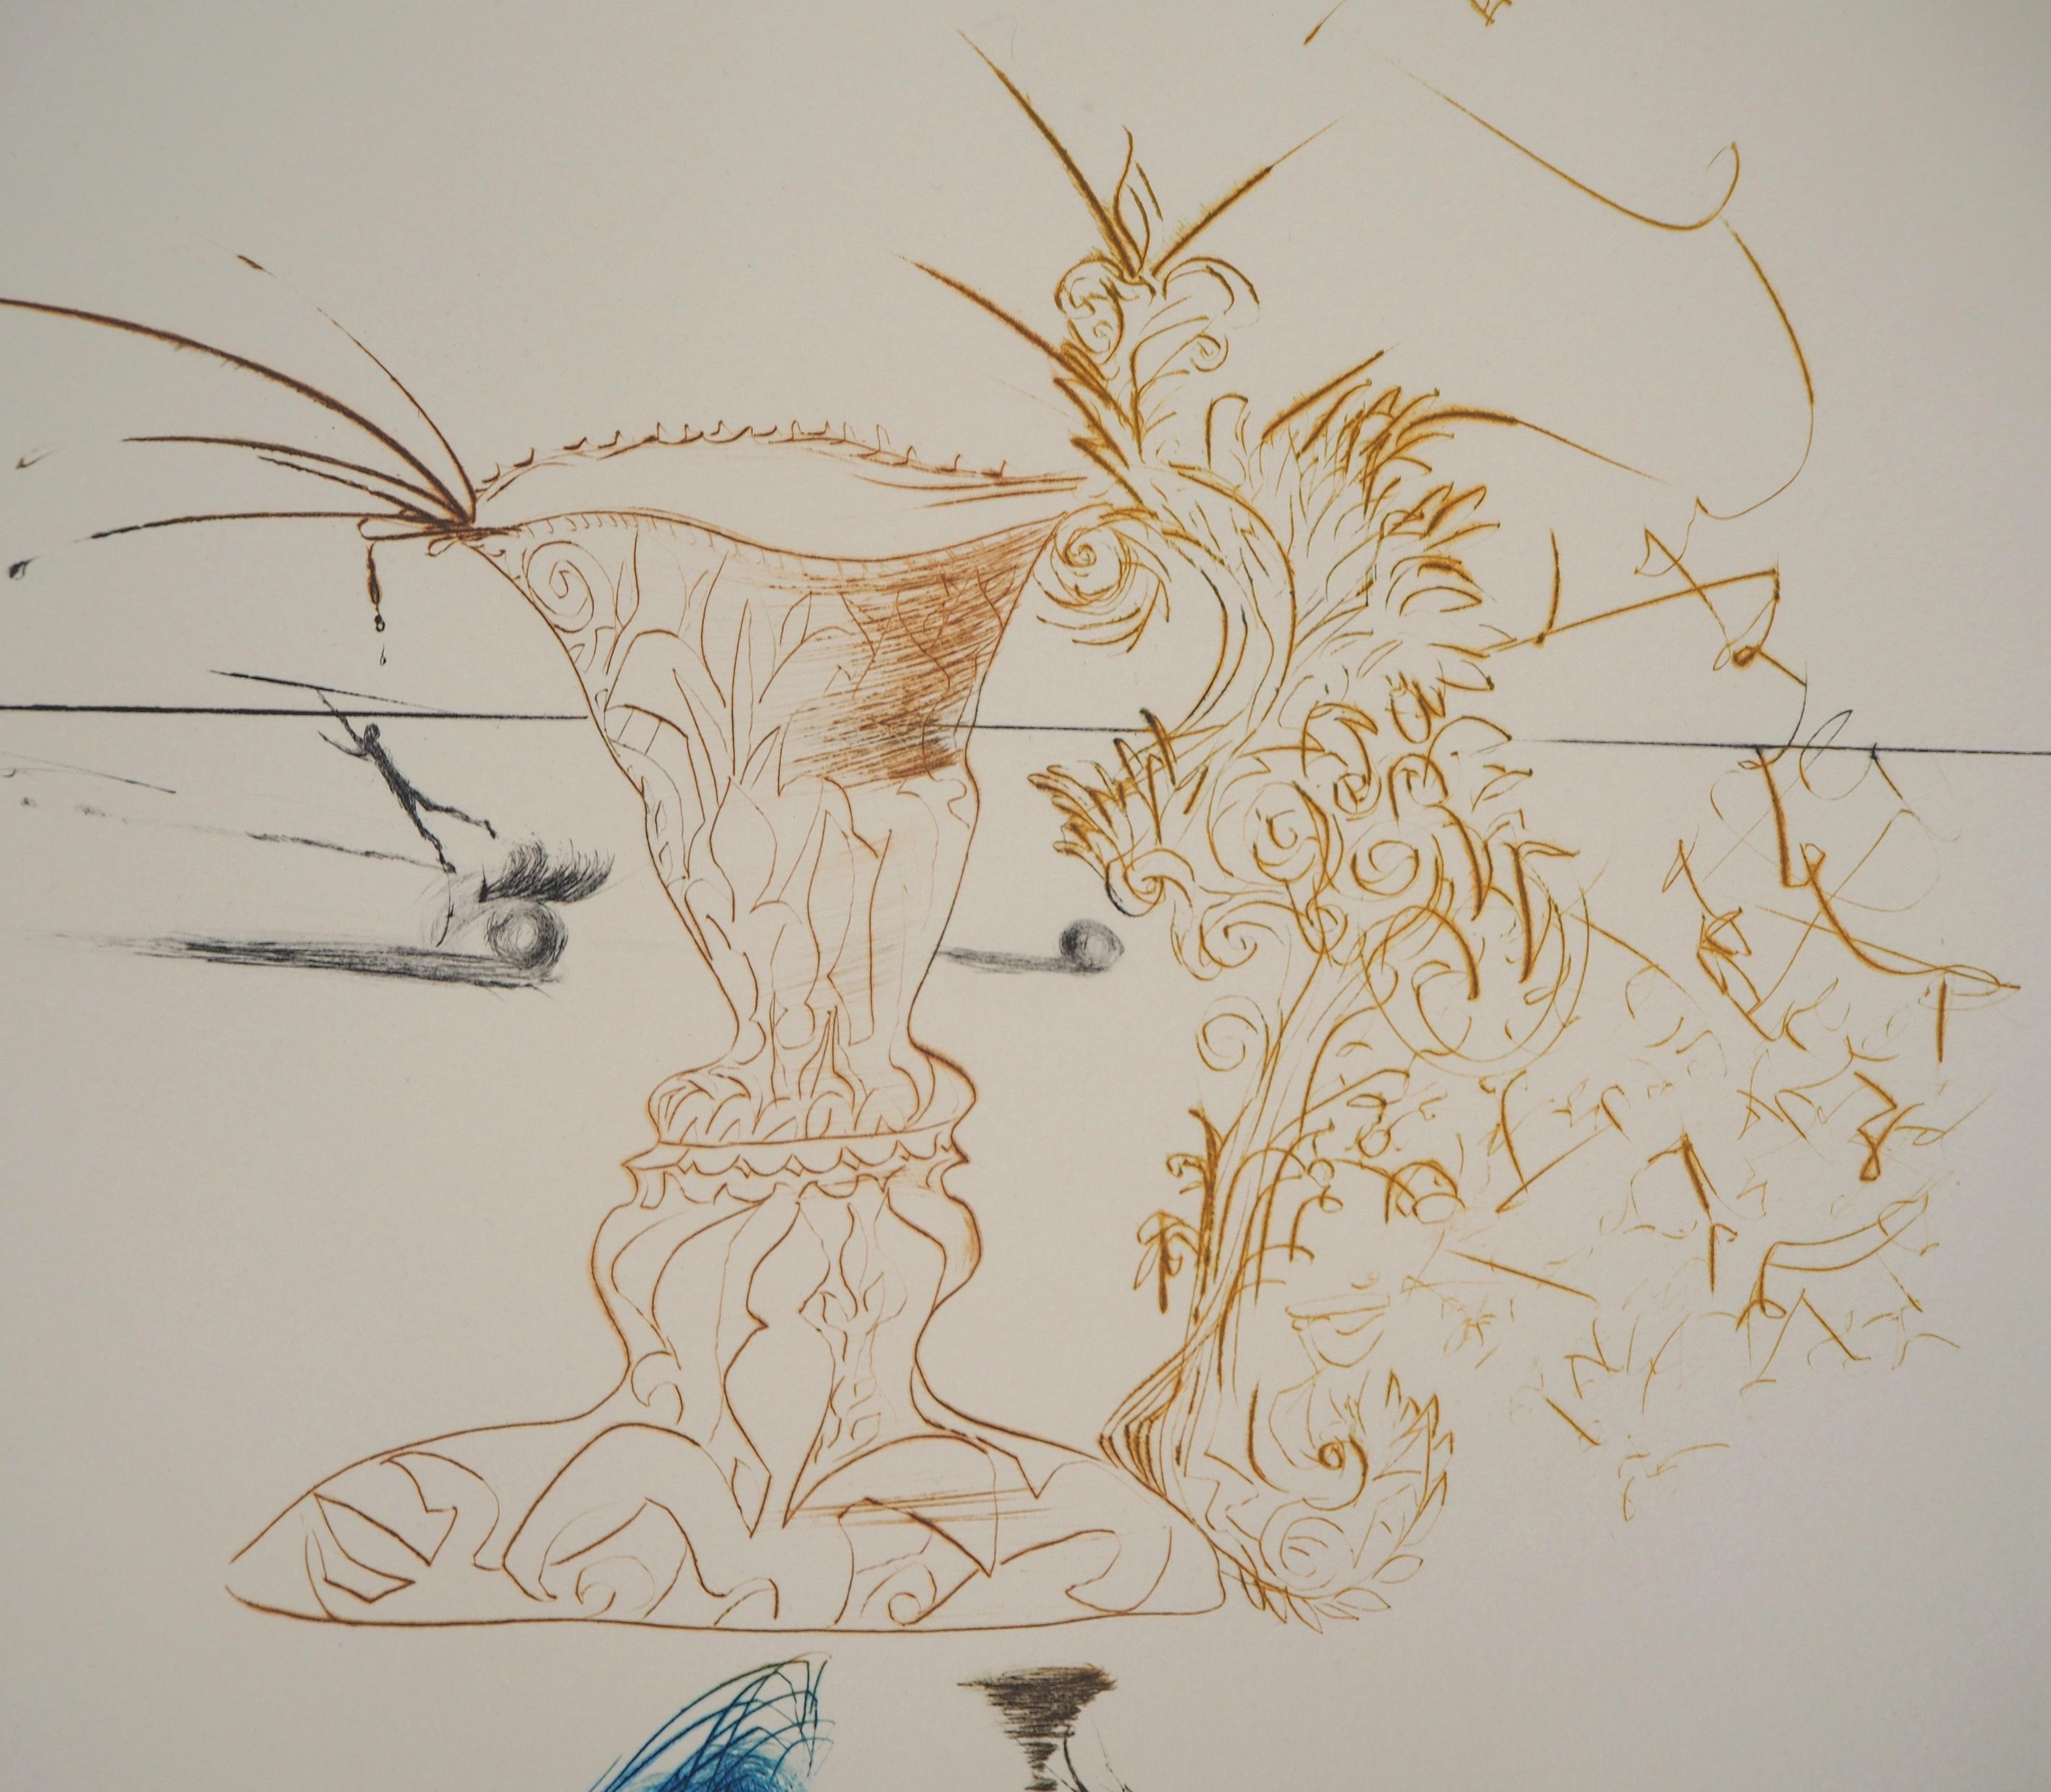 Salvador DALI
Tristan and Iseult and Cup Faces (Frontipiece), 1970

Original Etching 
Handsigned in pencil
One of the 25 copies (numbered in roman number)
On Arches vellum 45 x 32 cm (c. 18  x 12.5 in.)

REFERENCES : 
- Catalog raisonne Field #70-10